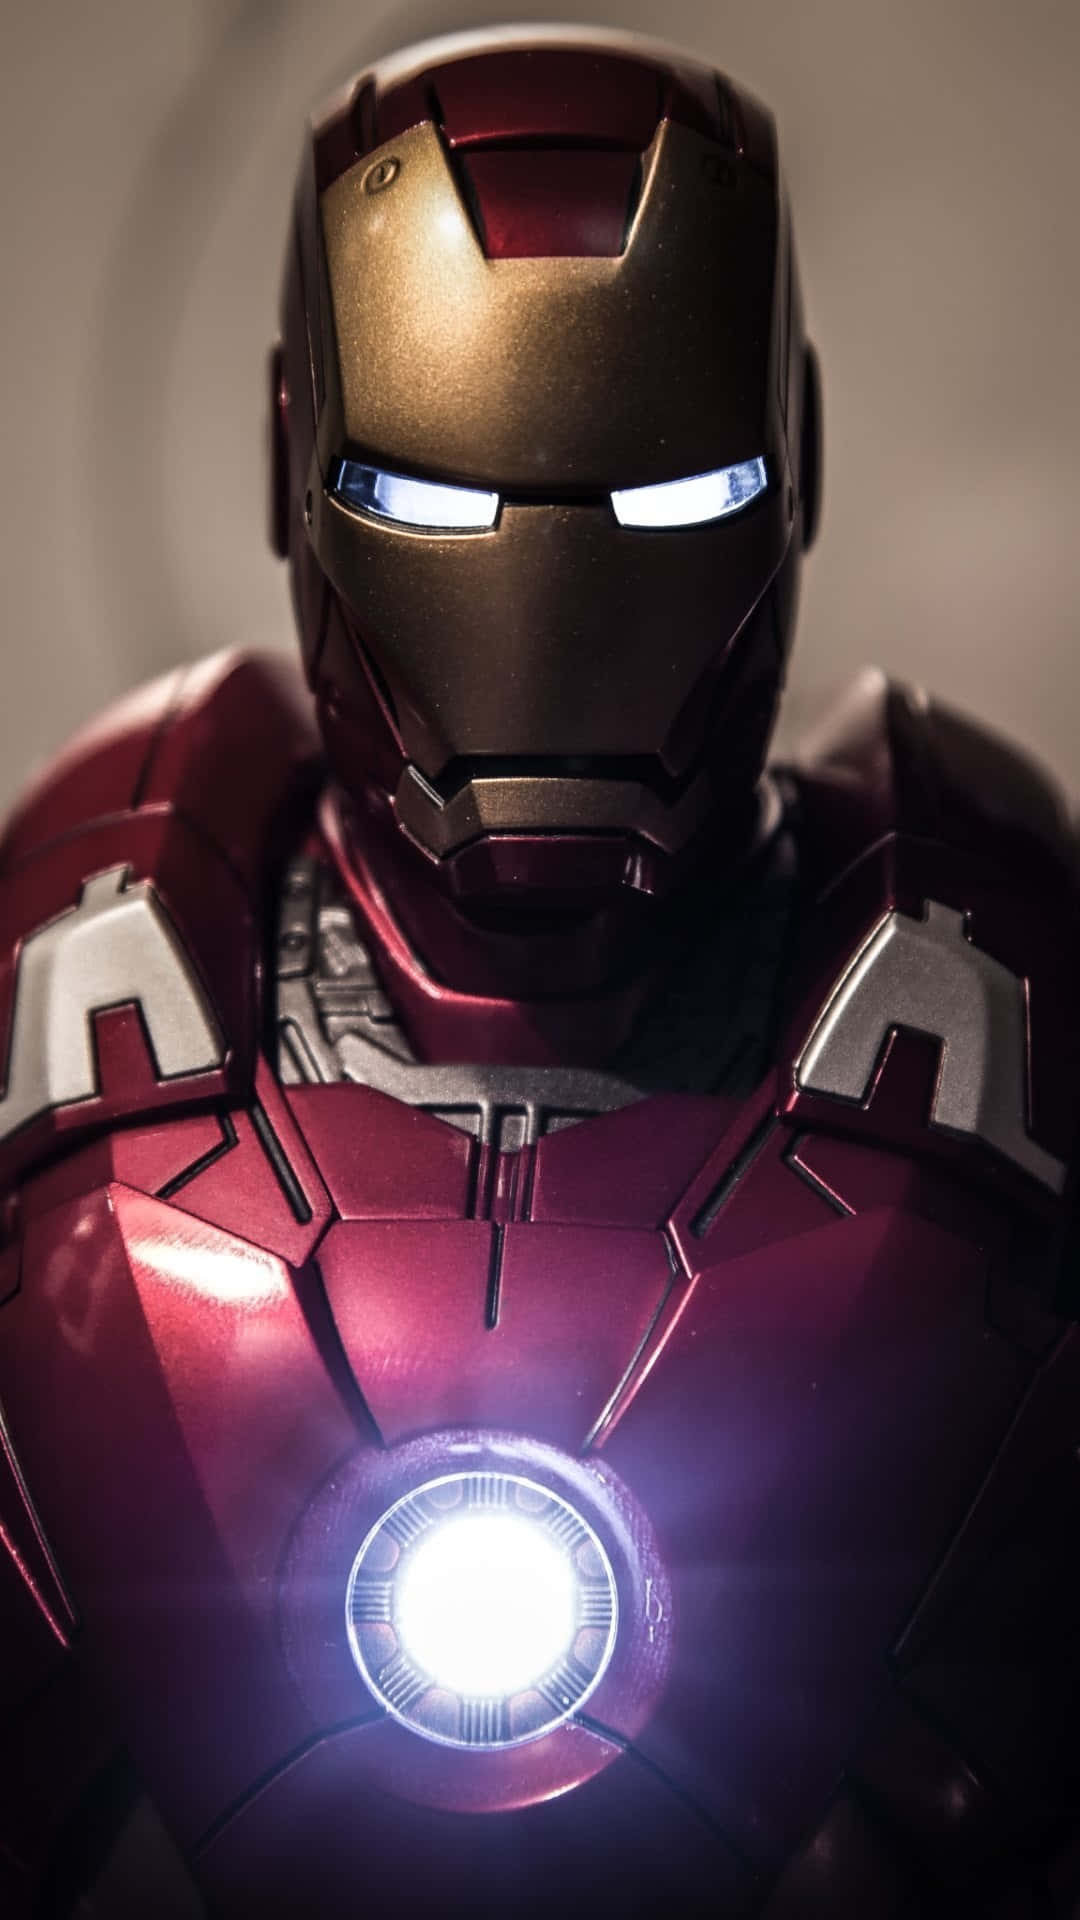 Show off your love of Iron Man with this awesome Cool Iron Man Iphone wallpaper Wallpaper